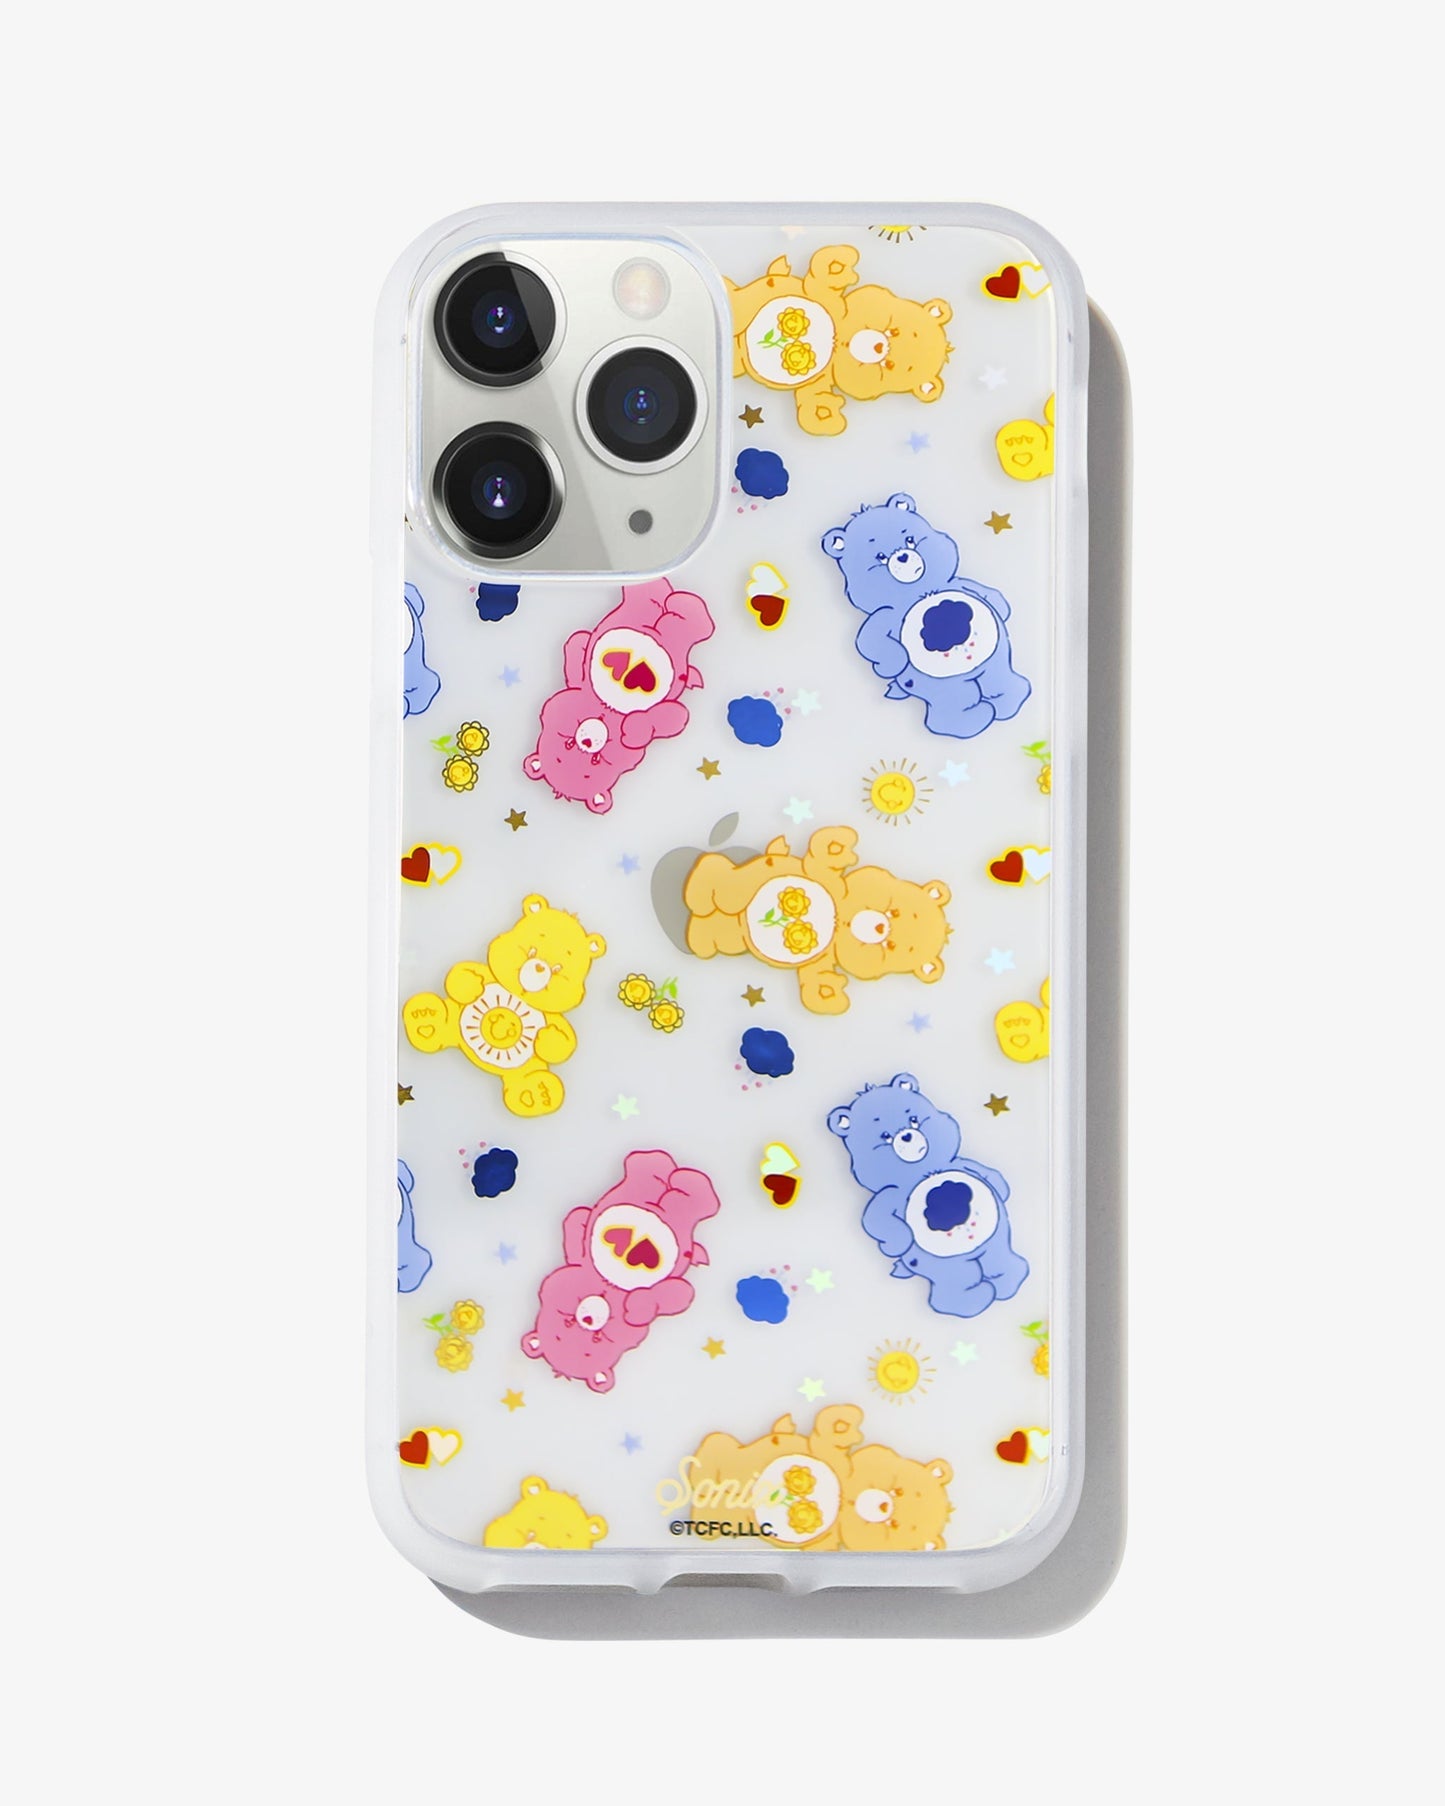 Care Bears: Love-a-lot, Grumpy, Funshine, and Friend Bear, with colorful mini playful icons shown on an iphone 11 pro